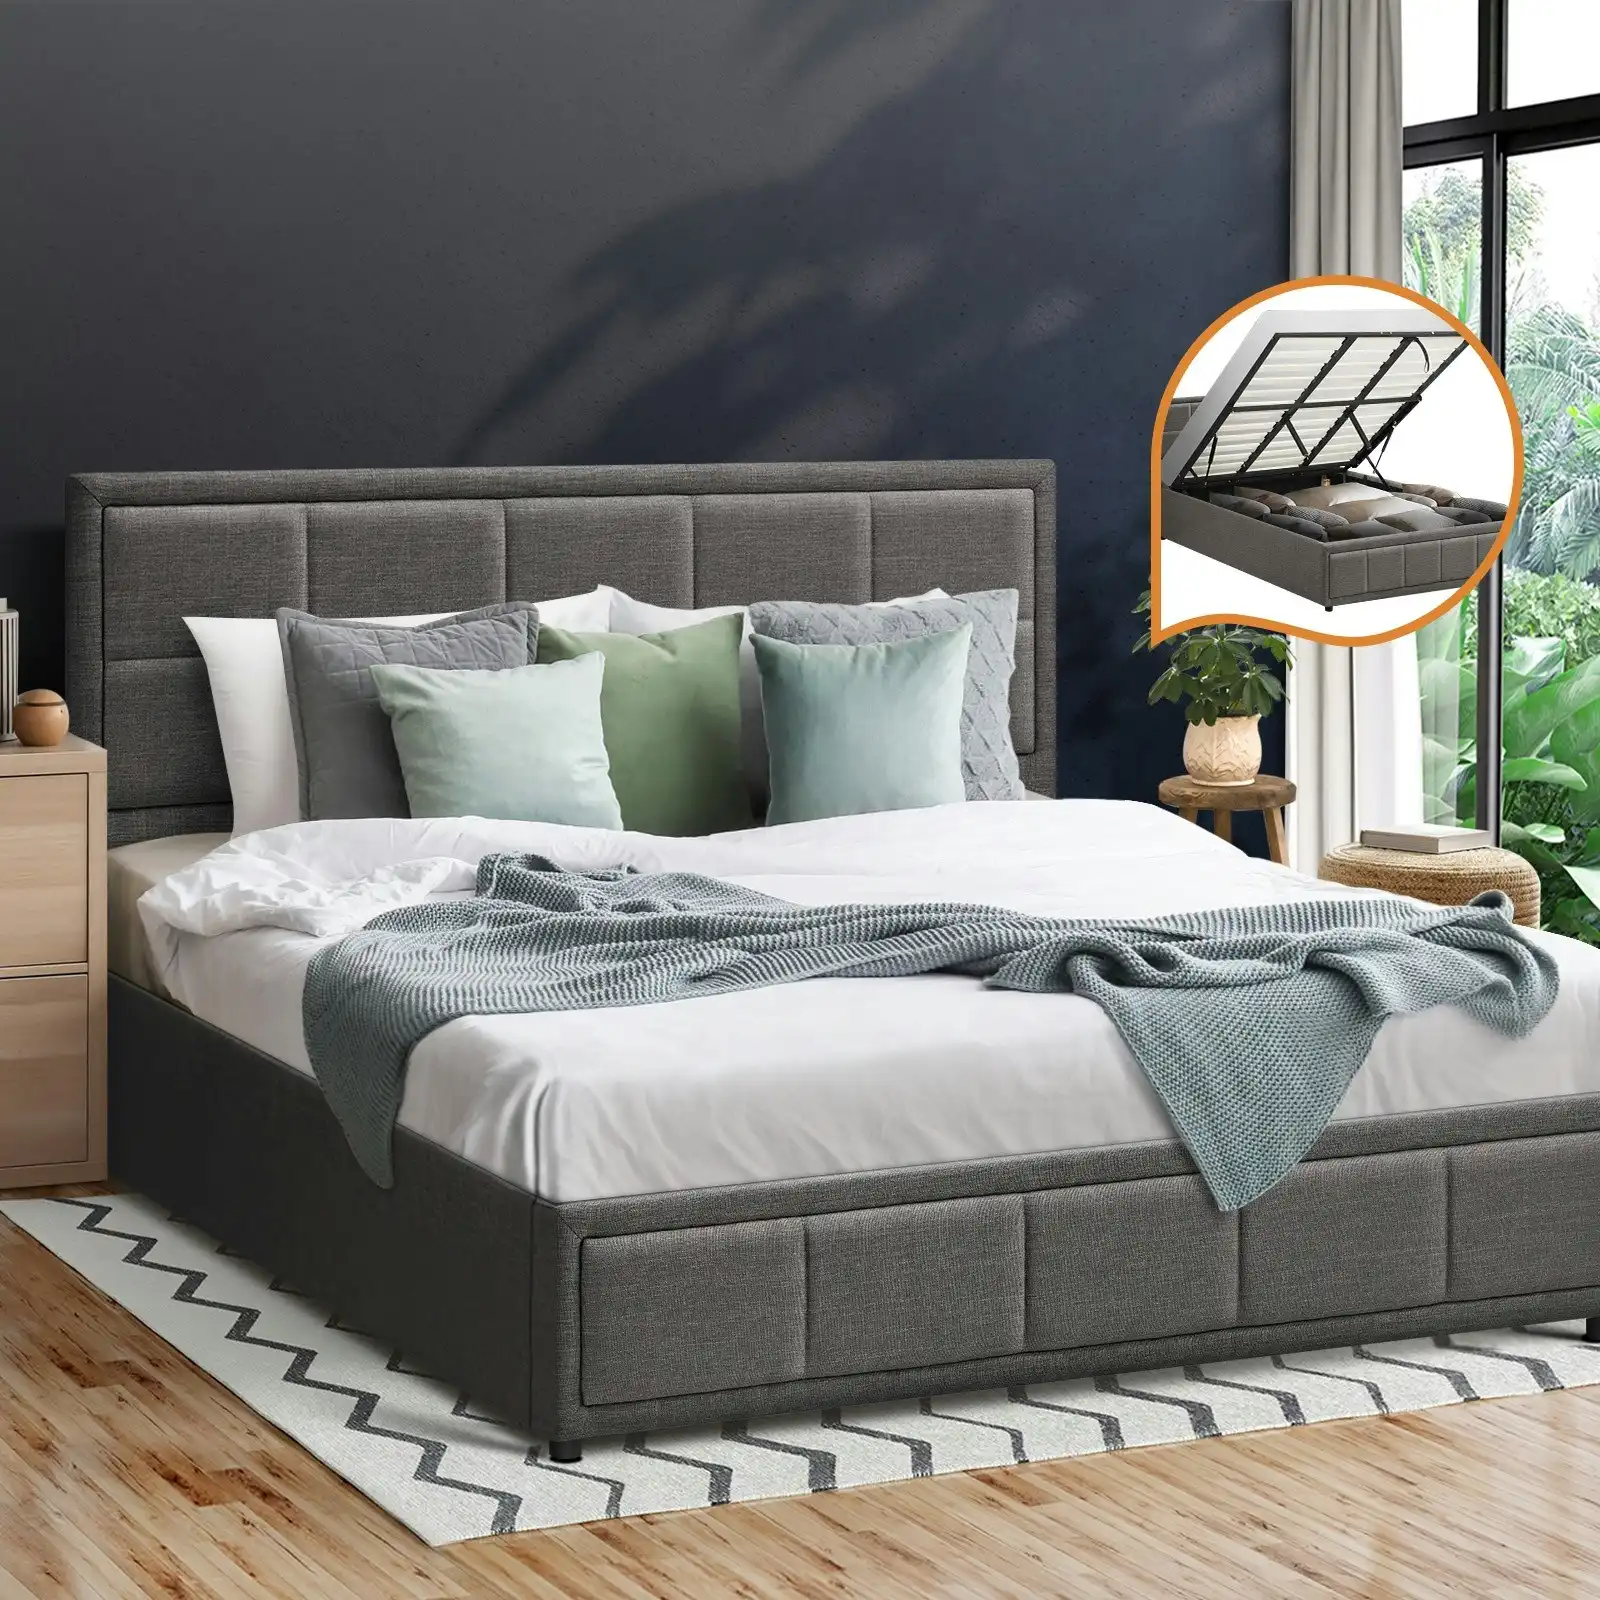 Oikiture Bed Frame King Size Gas Lift Storage Base Fabric Grey